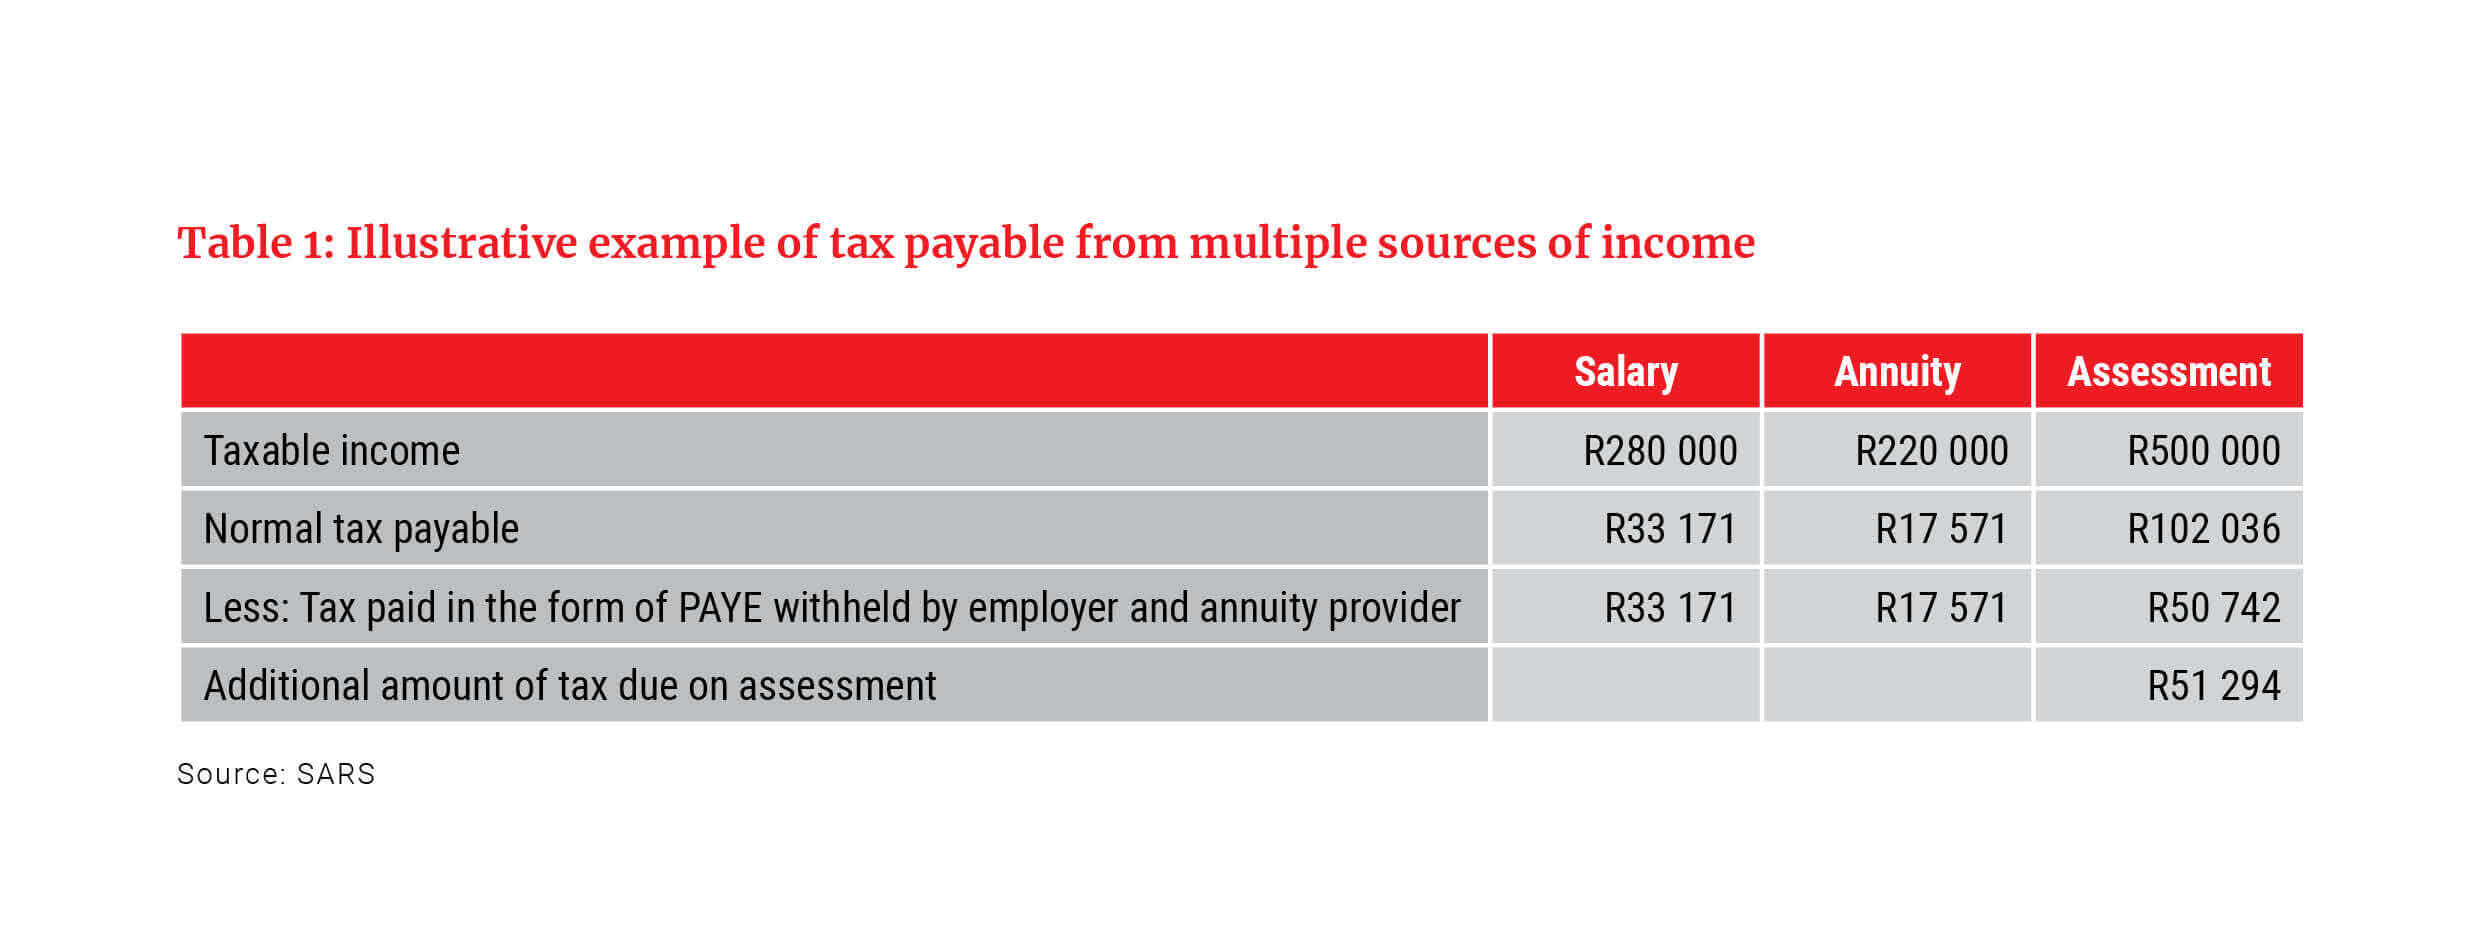 Illustrative example of tax payable from multiple sources of income - South Africa